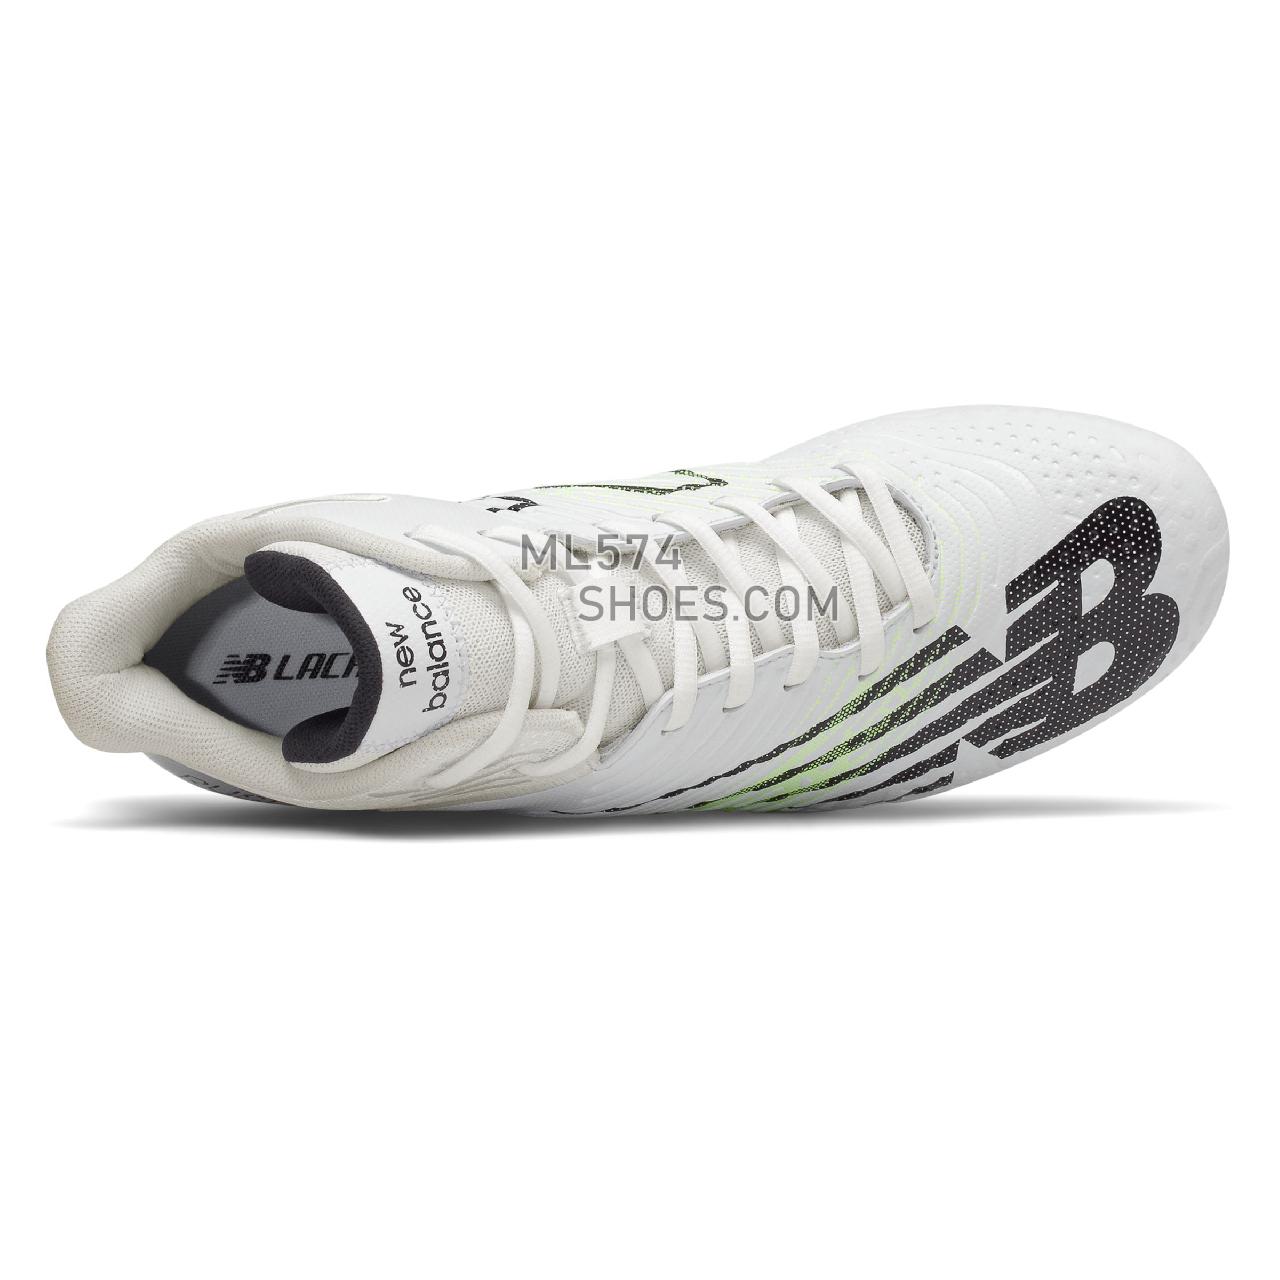 New Balance RushV3 Mid - Men's Turf And Lacrosse Cleats - White with Bleached Lime Glo - RUSHMW3